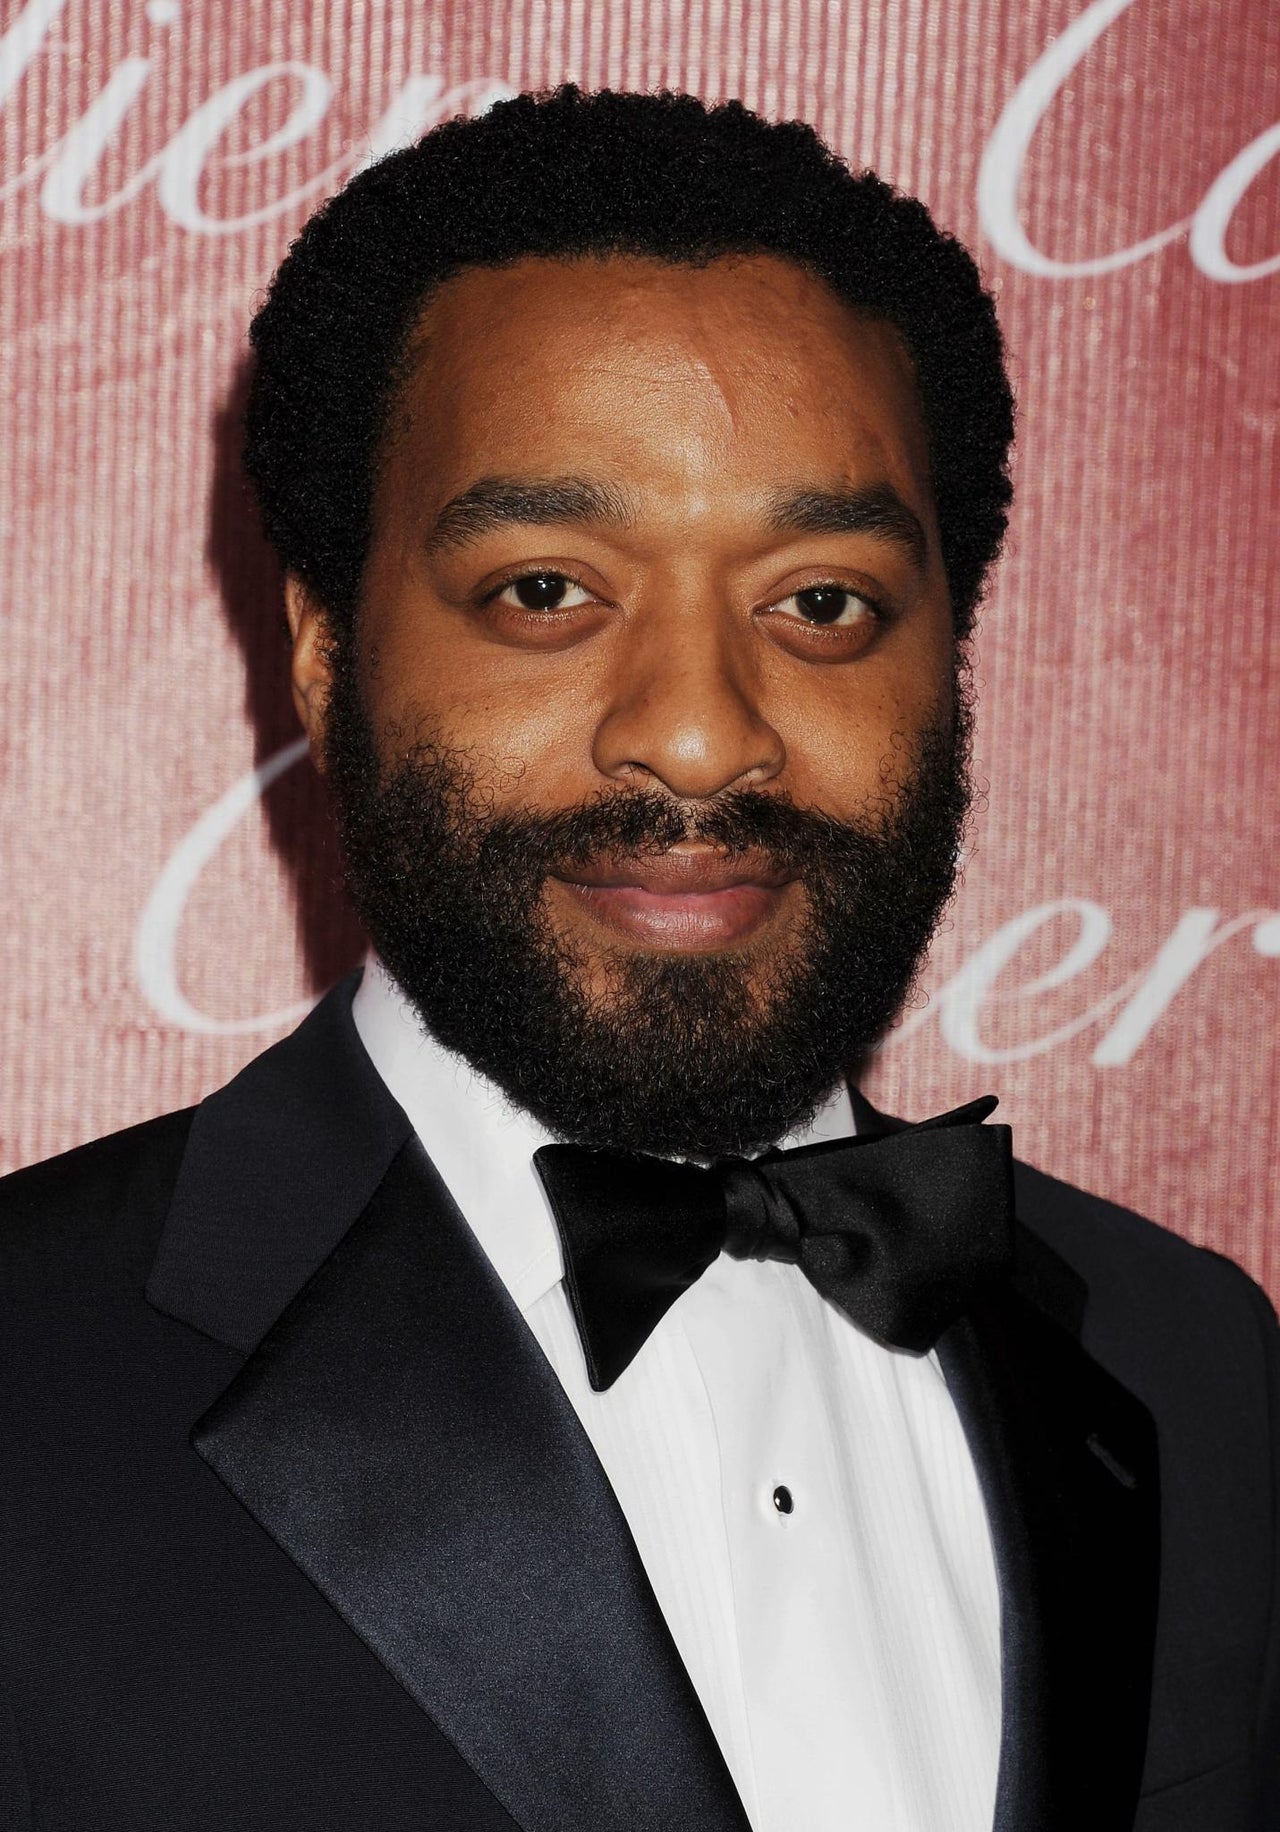 Chiwetel Ejiofor in Talks to Star in James Bond | Essence